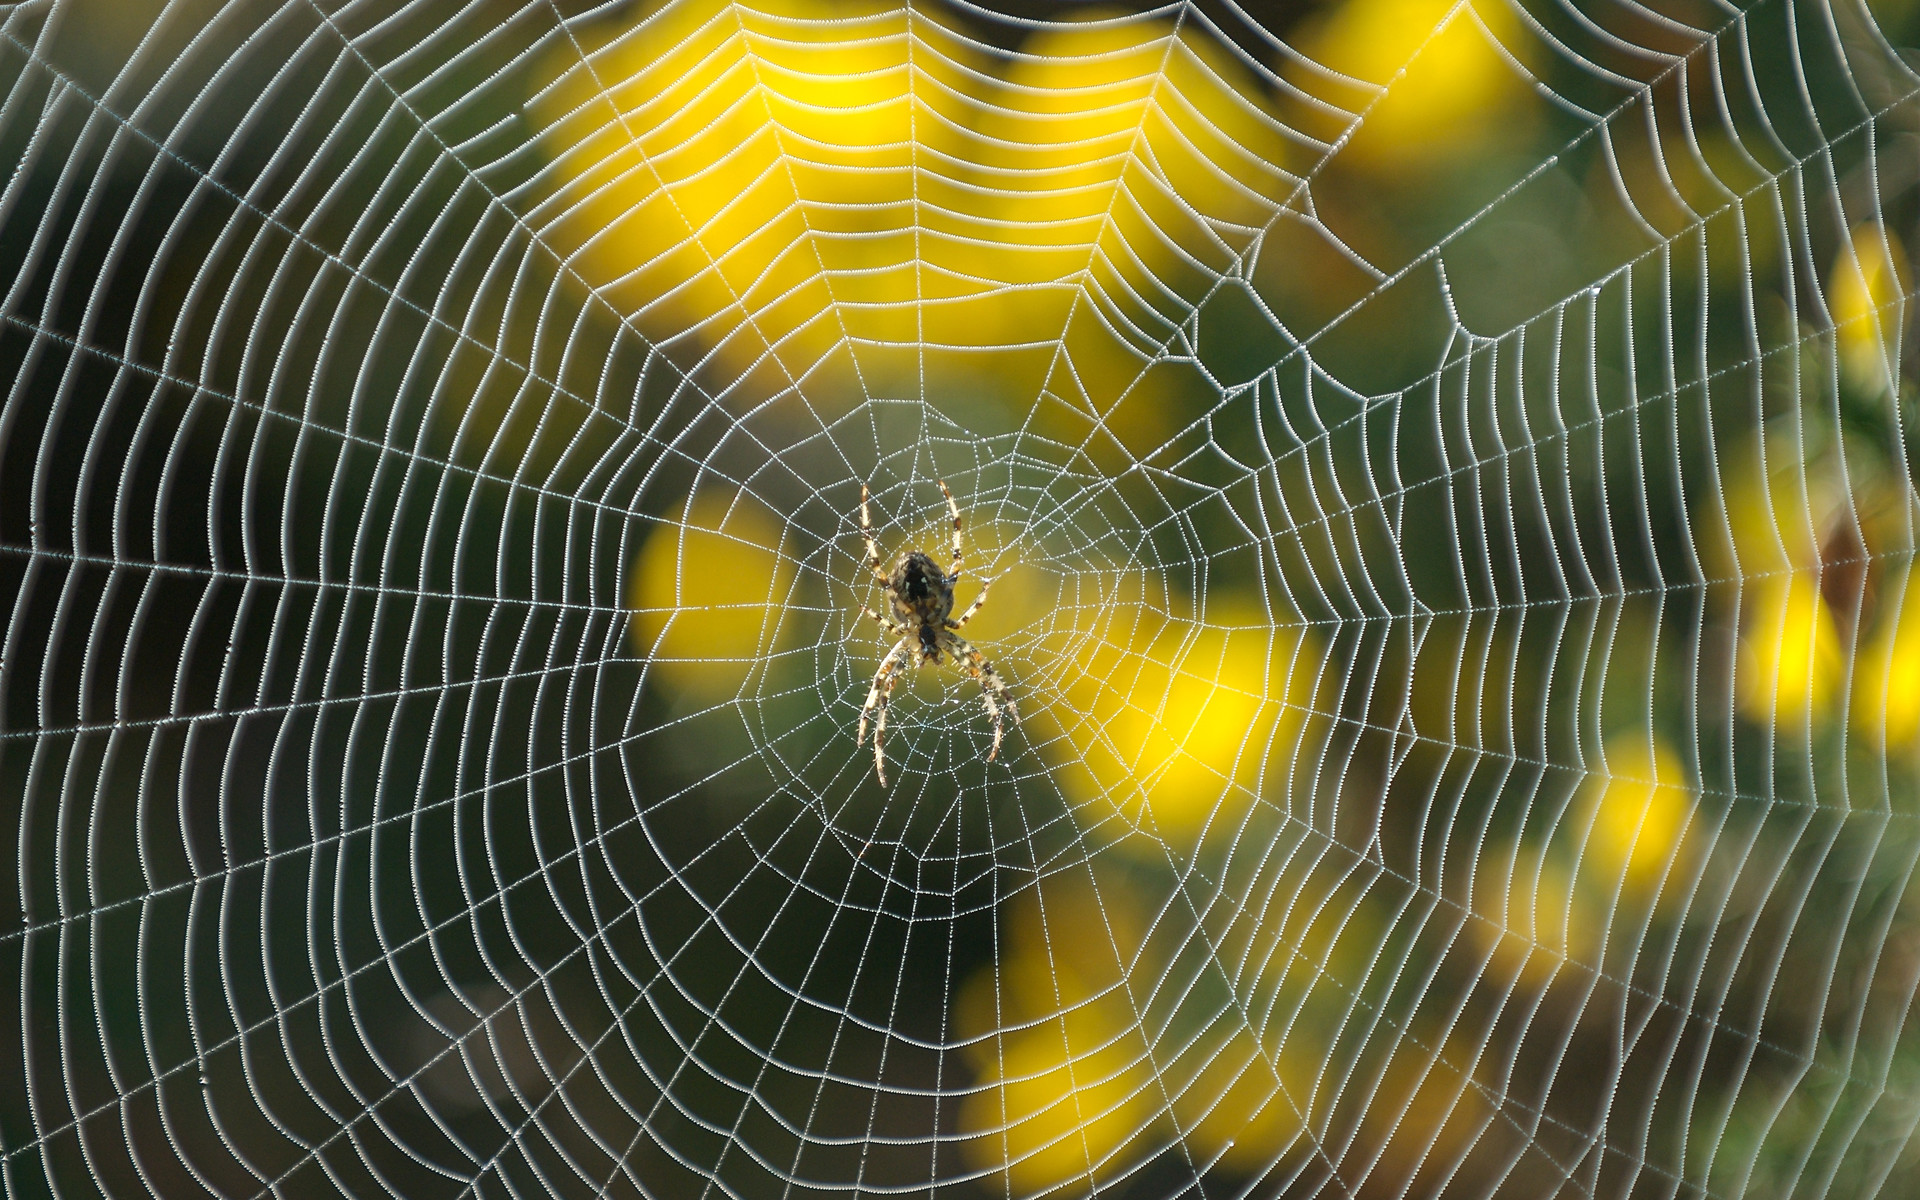 Where God is, a spiders web is as a stone wall. Where God is not, a stone wall is as a spiders web